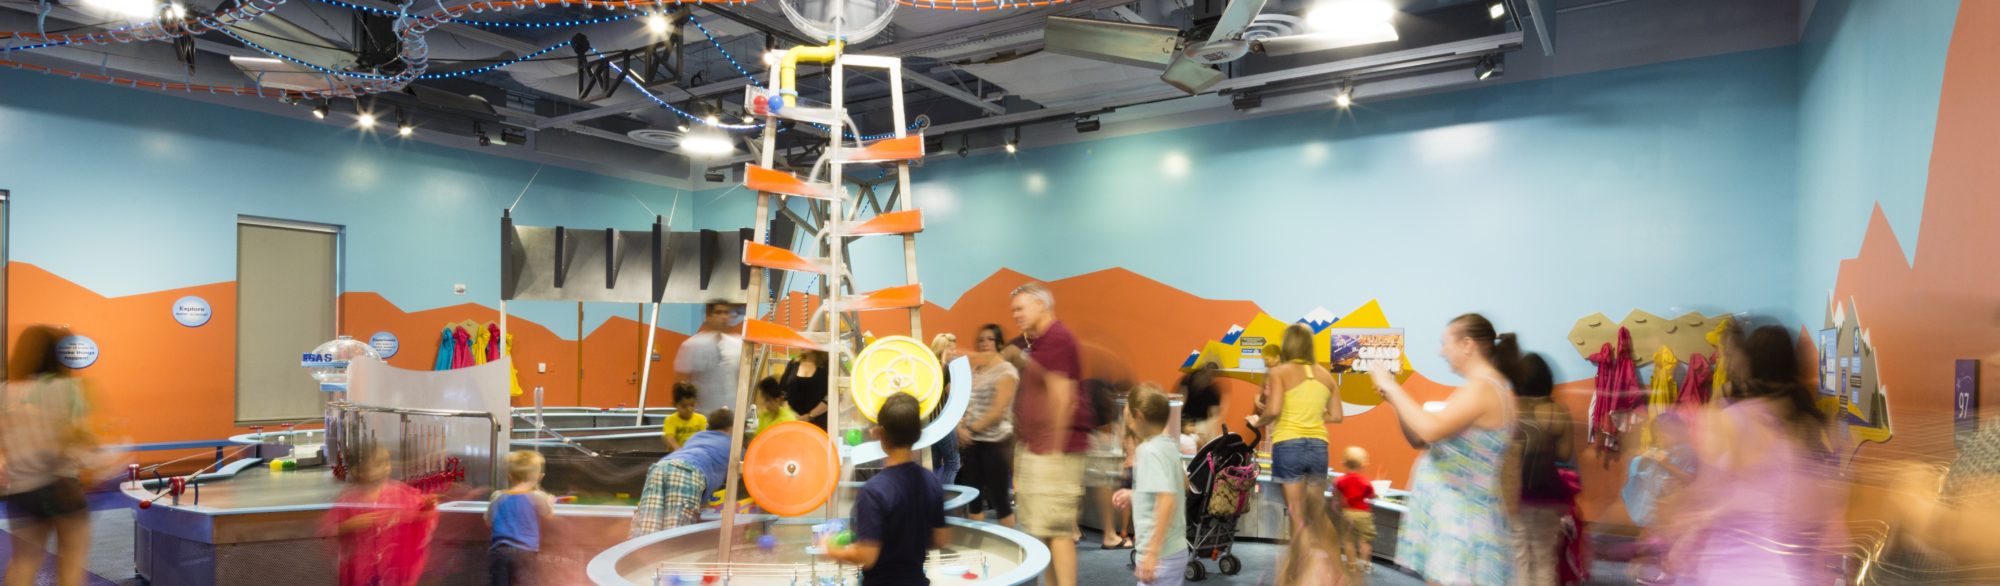 Children and adults enjoying the exhibits at the Discovery Children's Museum, designed by LGA Architecture.